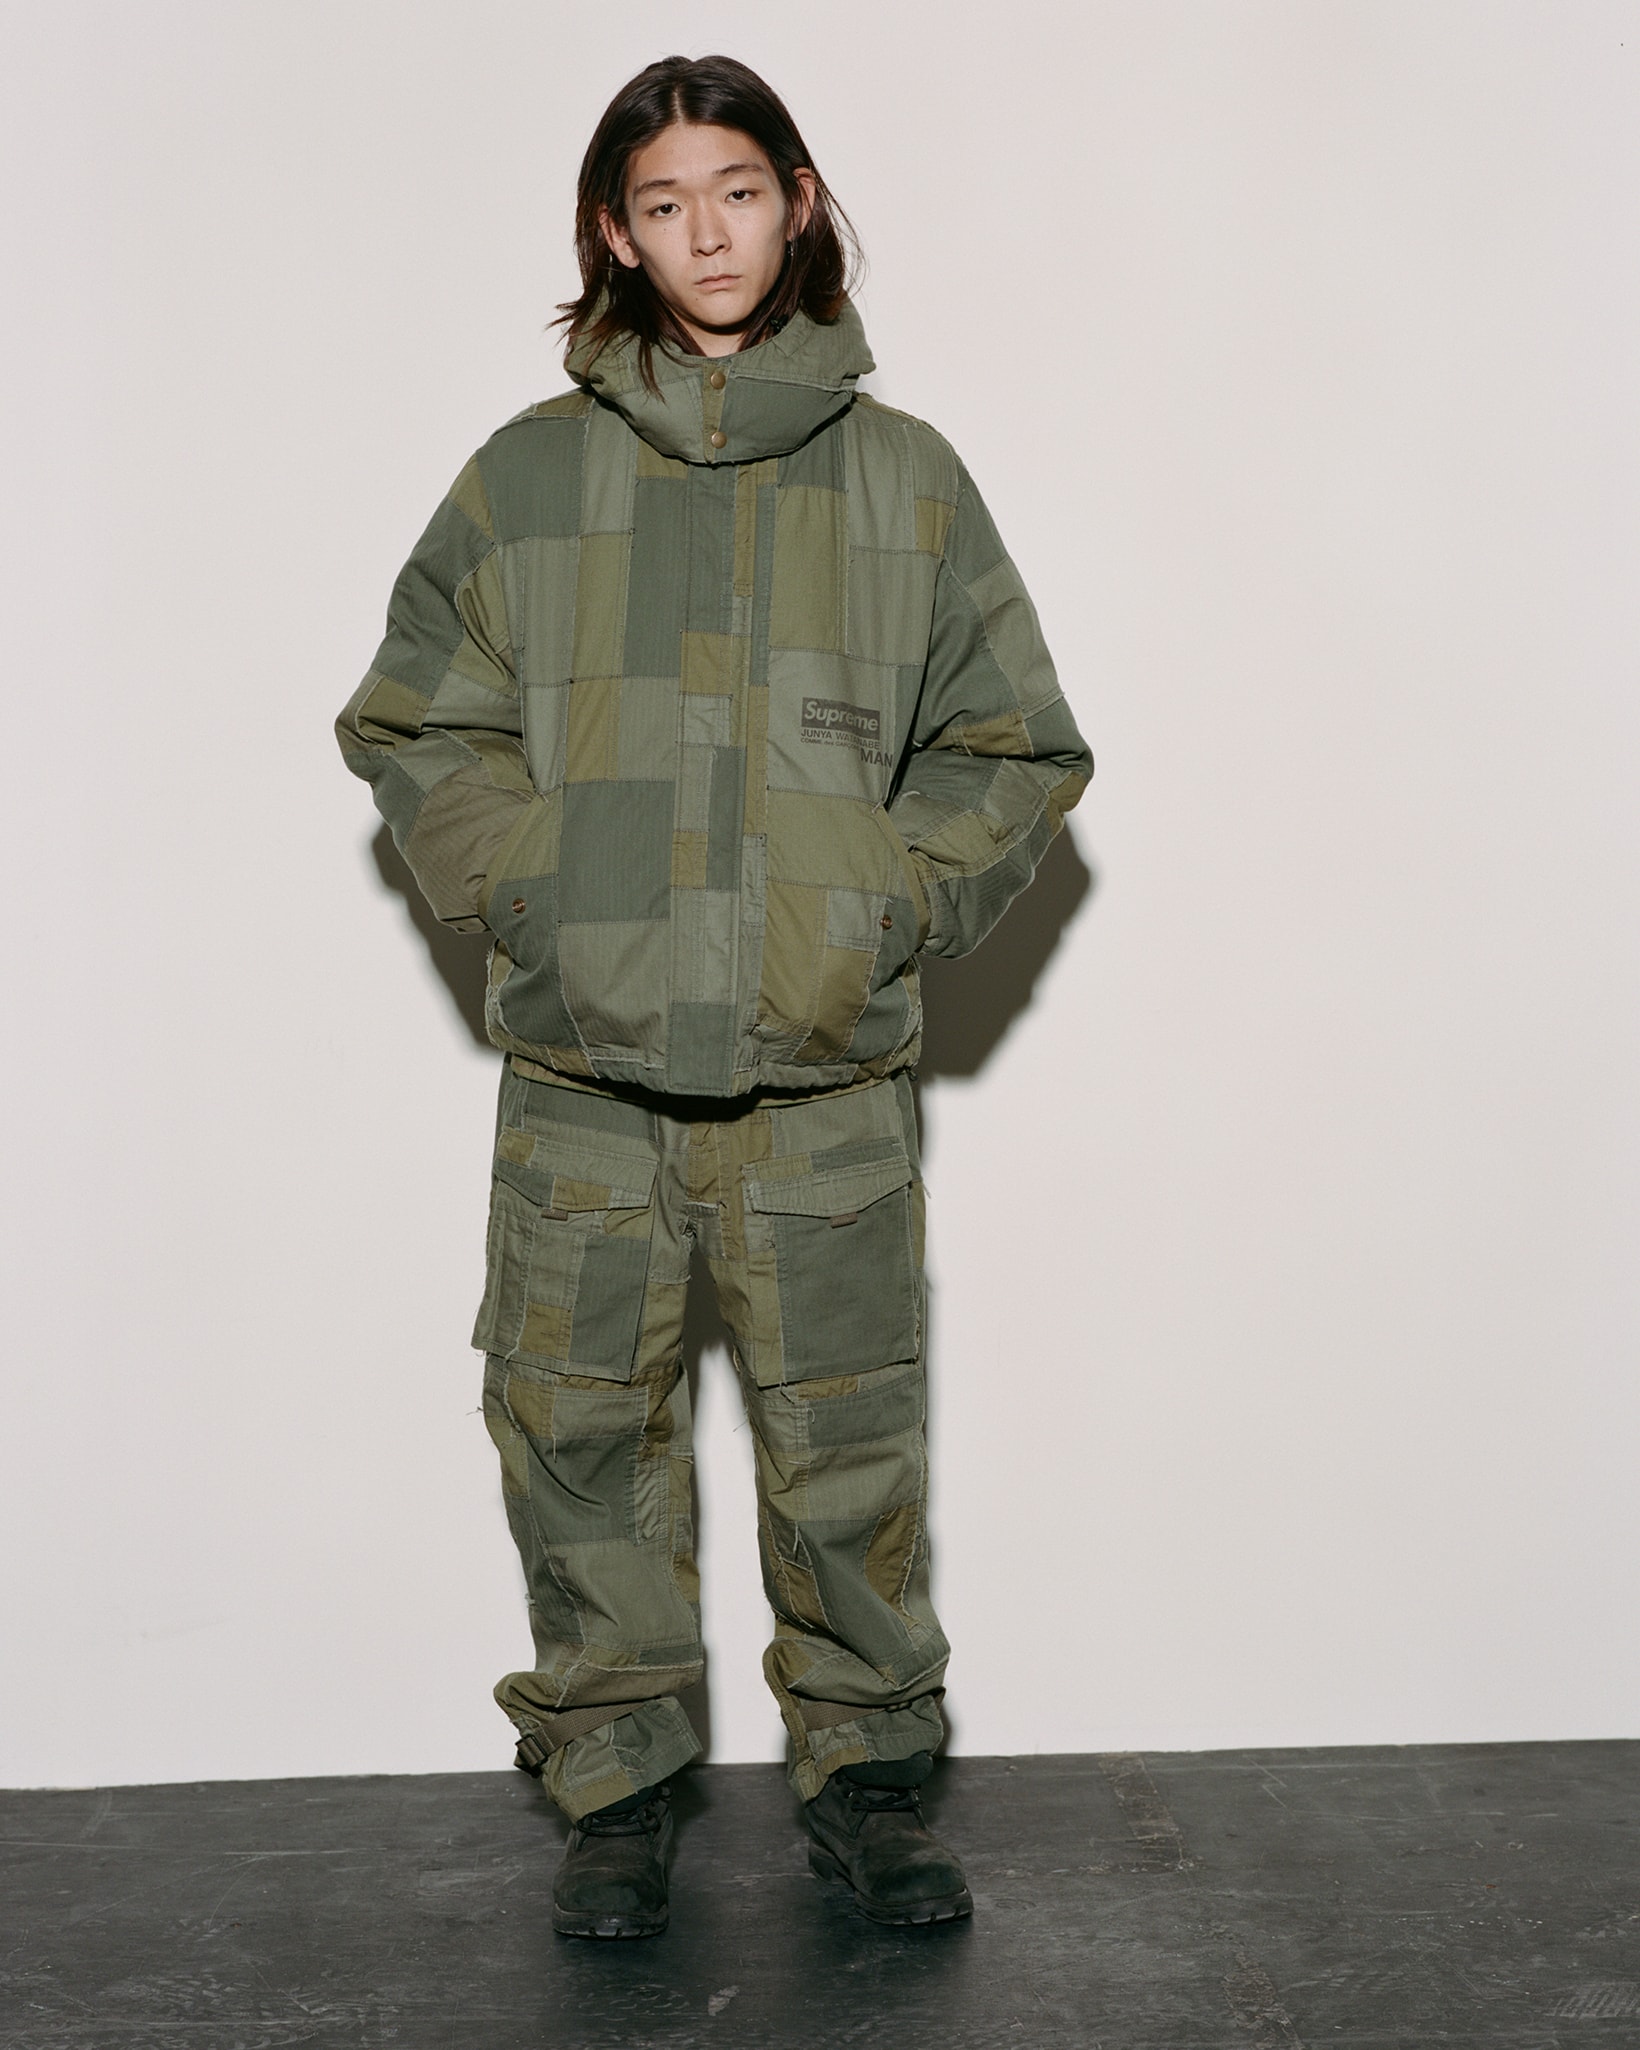 Supreme Fall JUNYA WATANABE COMME des GARÇONS MAN's Archives Collaboration Collection 